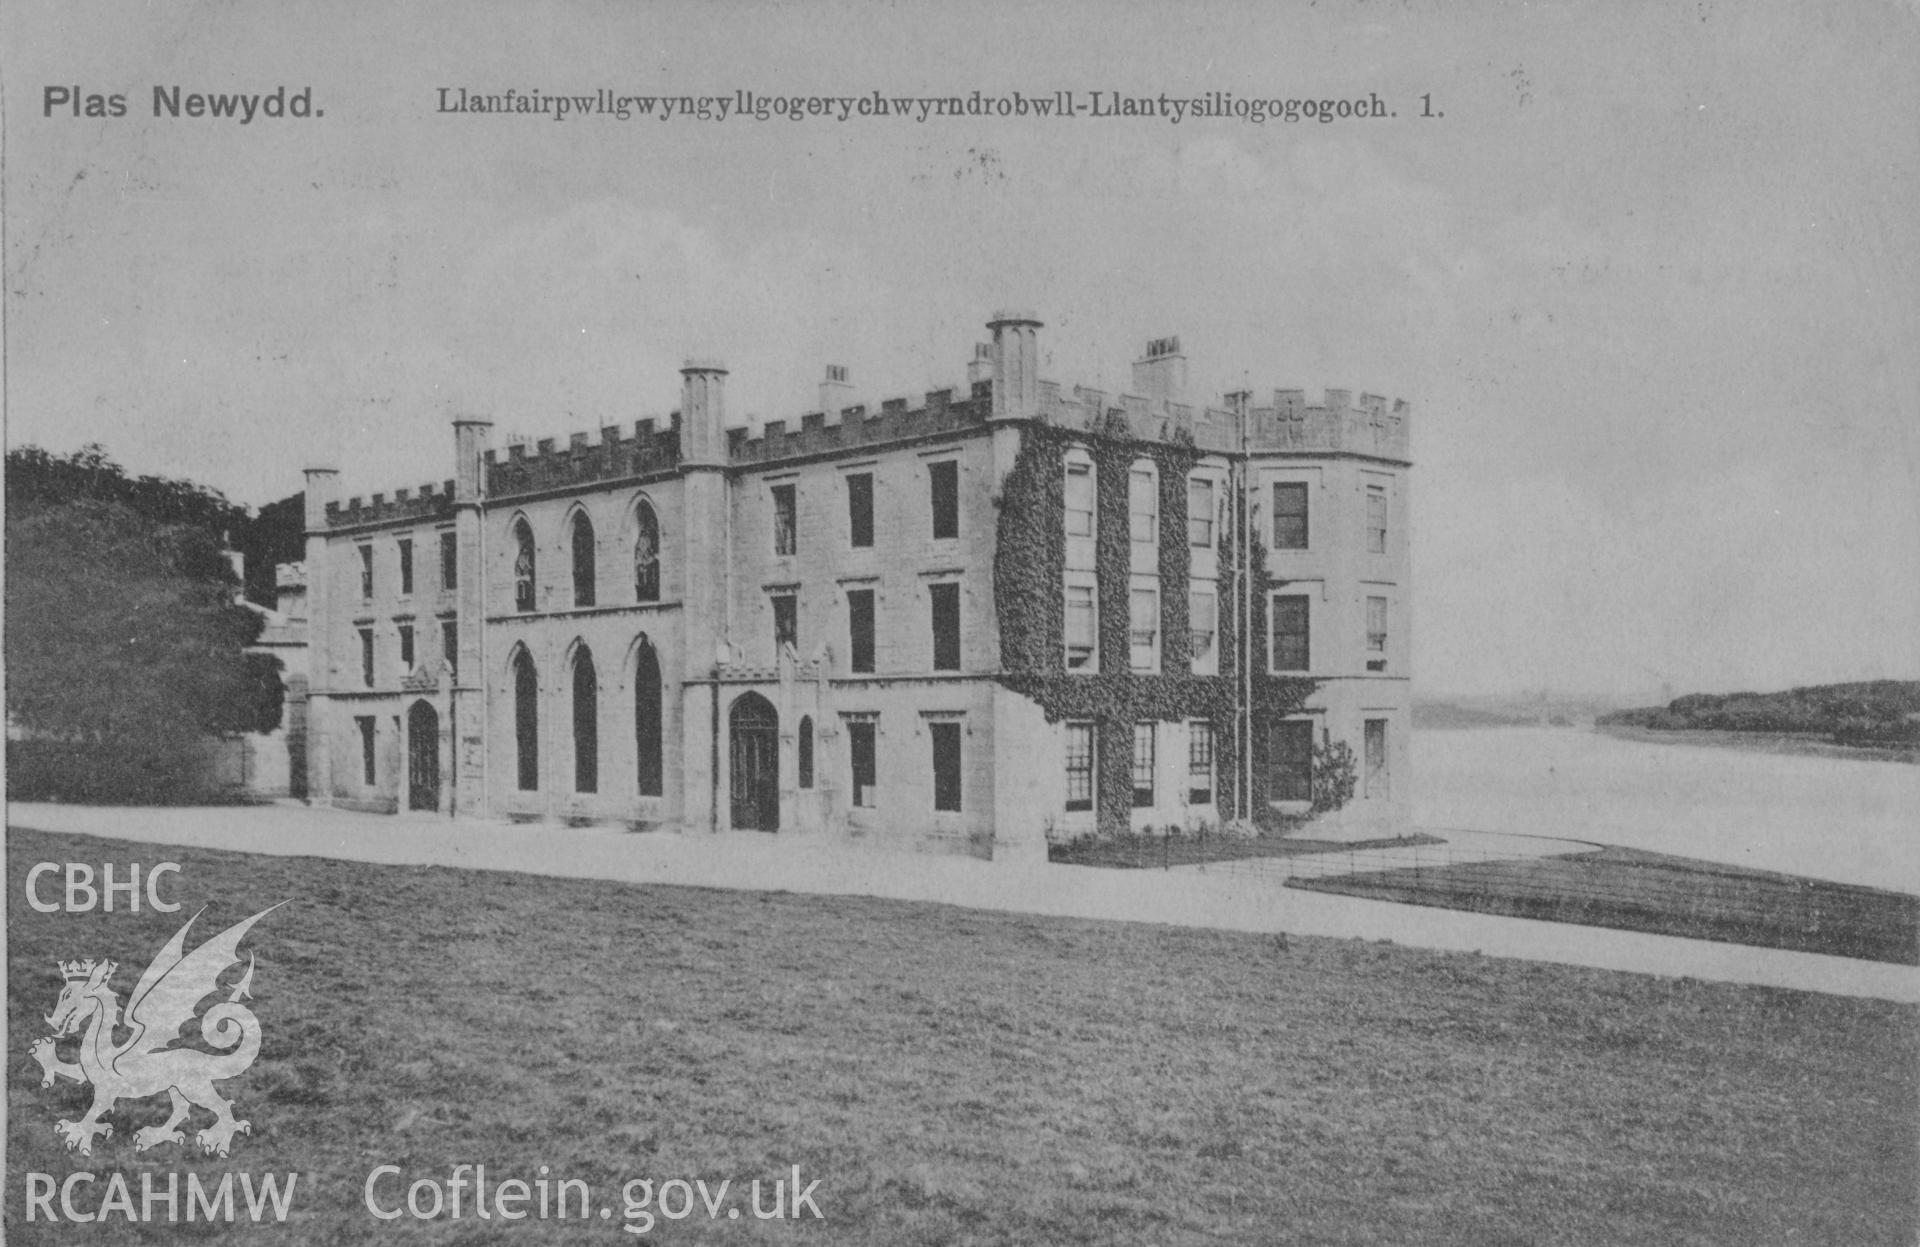 Plas Newydd, Anglesey; B&W photograph copied from a circa 1908 postcard showing a view noted as "before alteration", loaned for copying by Thomas Lloyd.